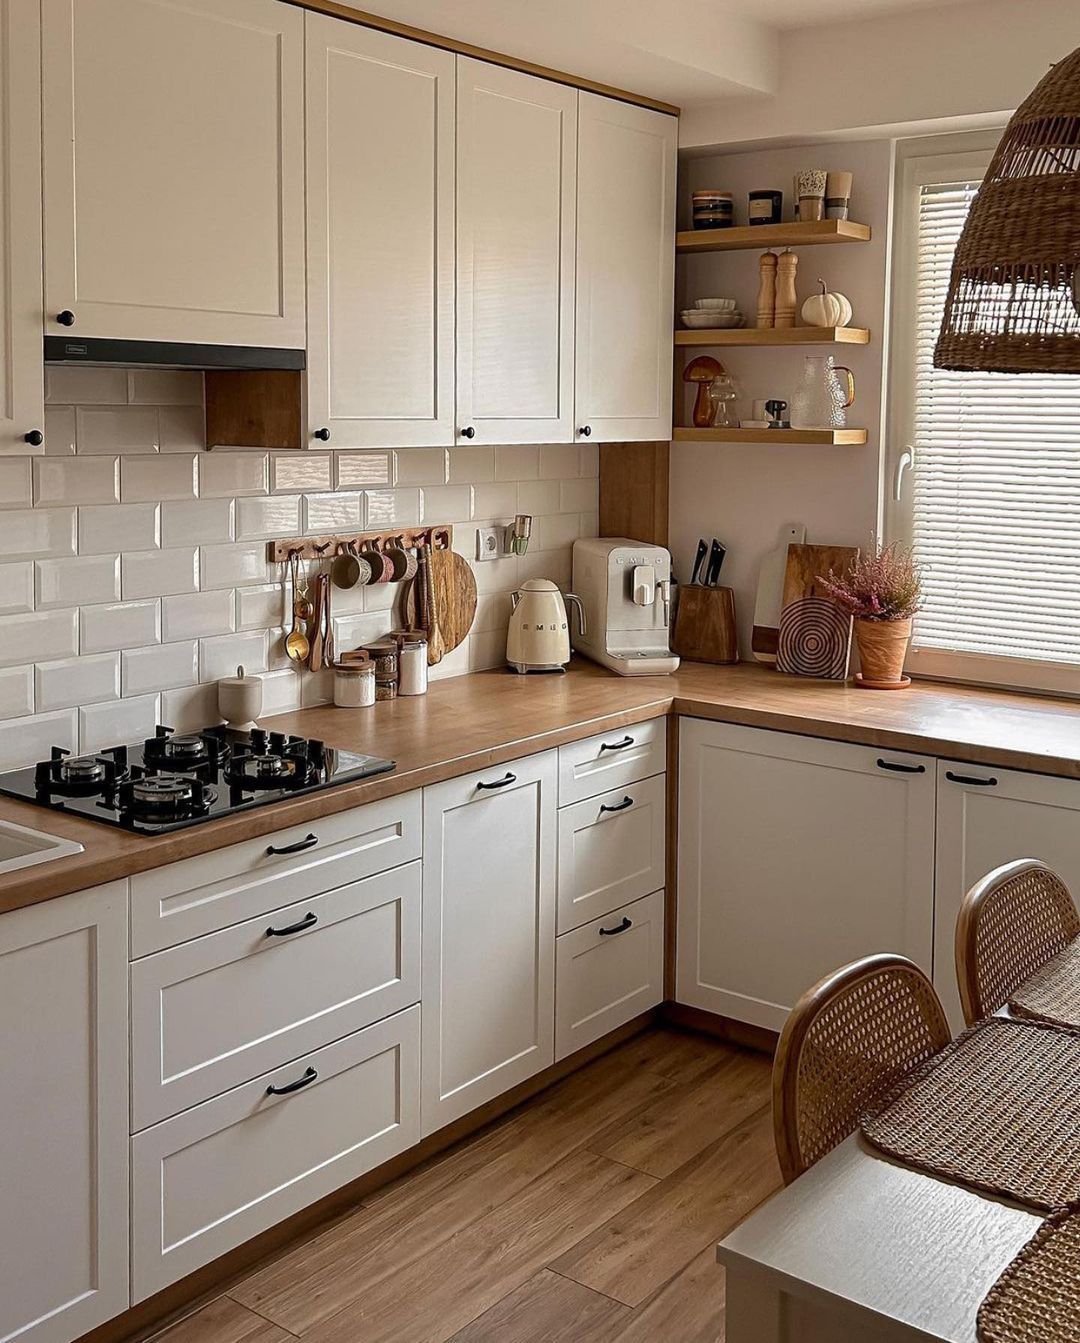 Small Kitchen Design Create an Efficient and Stylish Space for your Compact Kitchen